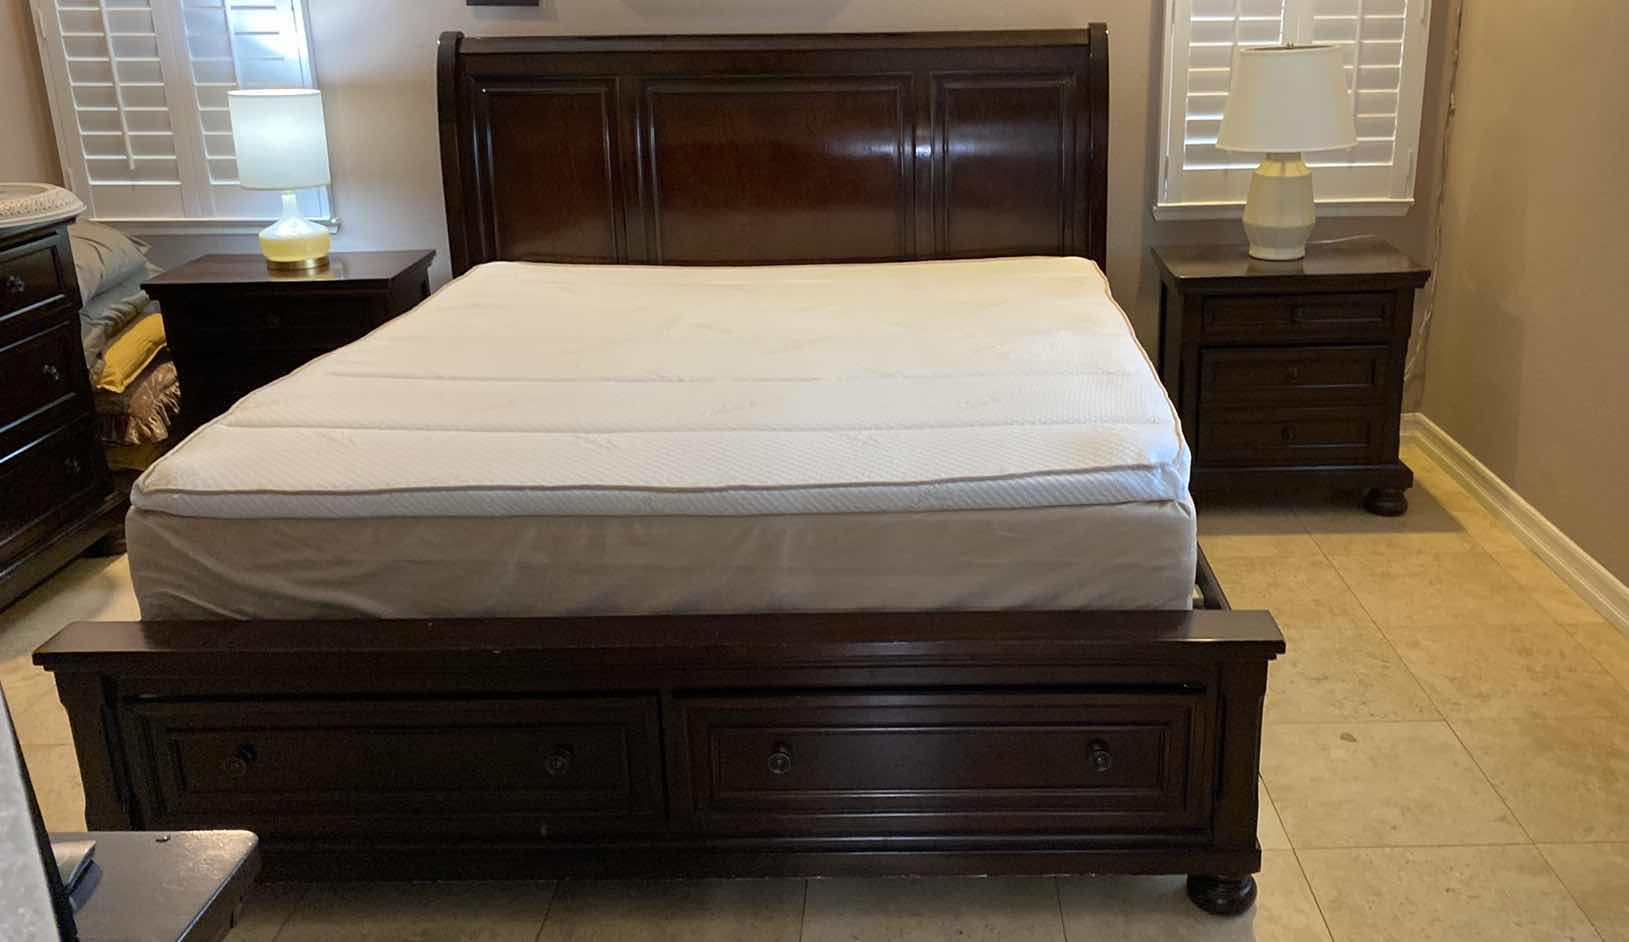 Photo 1 of KING/CAL KING SLEIGH-BED WITH 2 STORAGE DRAWERS 81 1/2” x 94” H 57” AND 2 NIGHT STANDS 29” x 18” H 30” (LAMPS AND MATTRESS SOLD SEPARATELY)